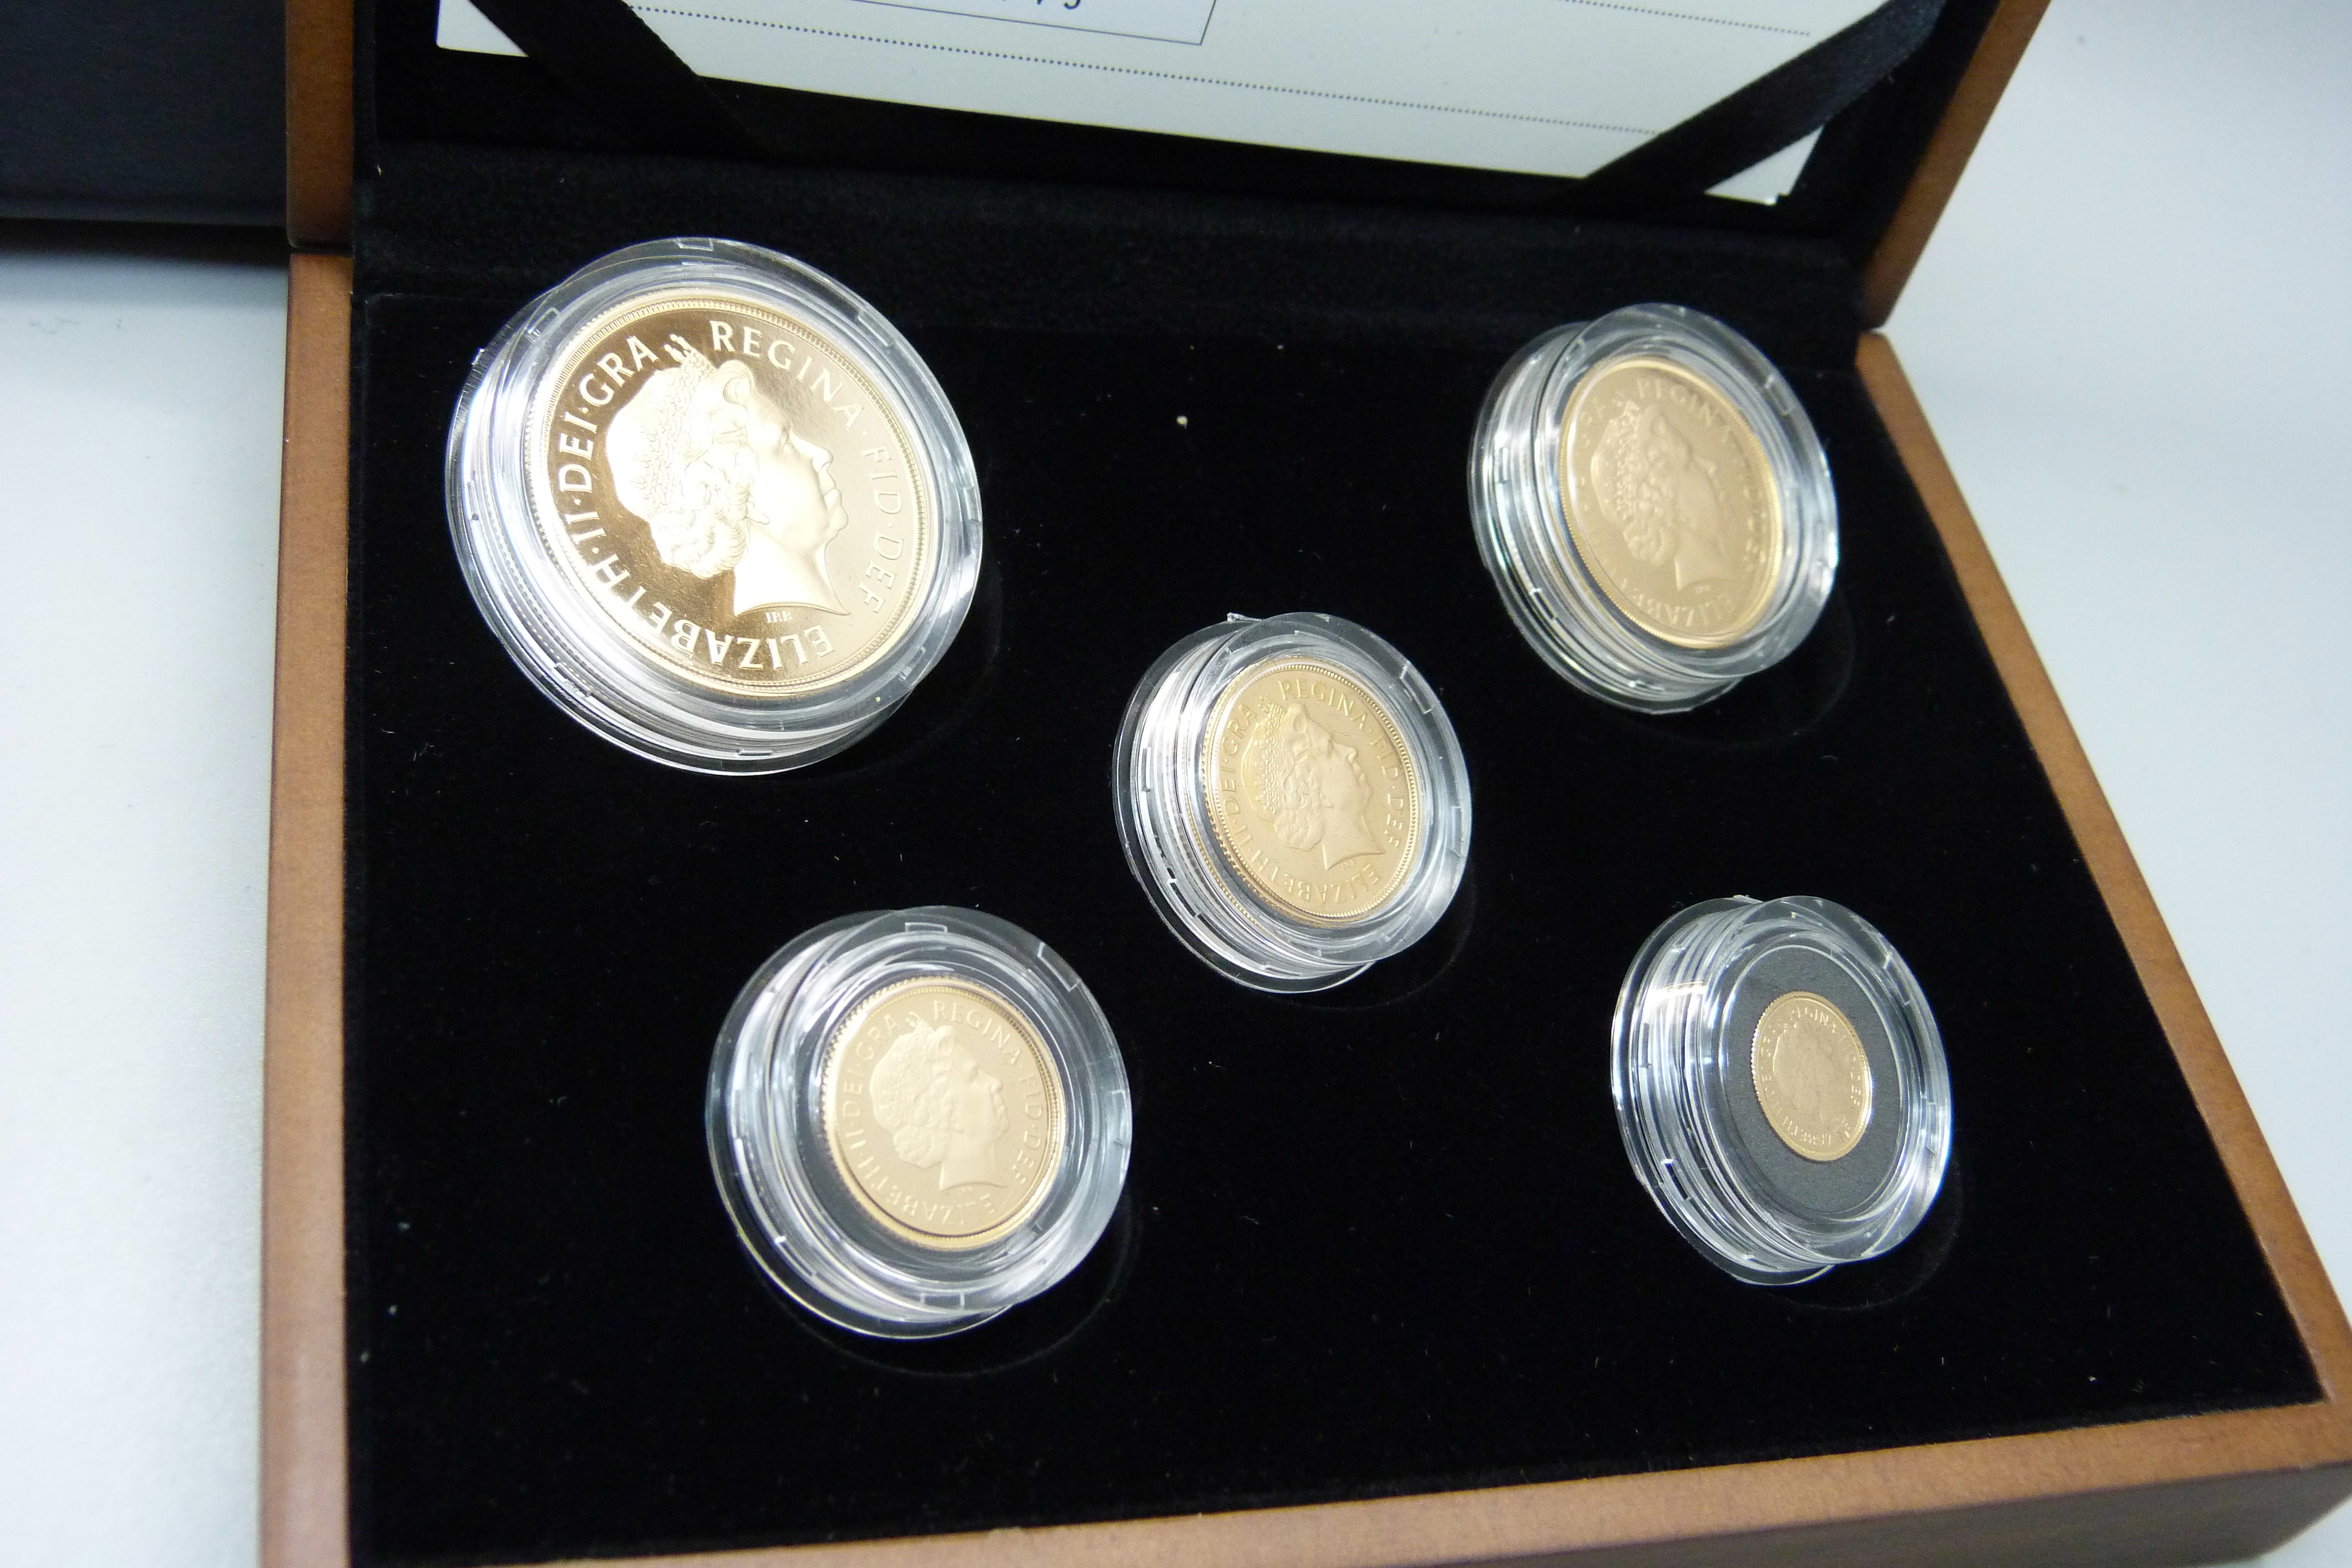 The Royal Mint 2009 UK gold proof five-coin collection, no. 1443 - Image 4 of 5